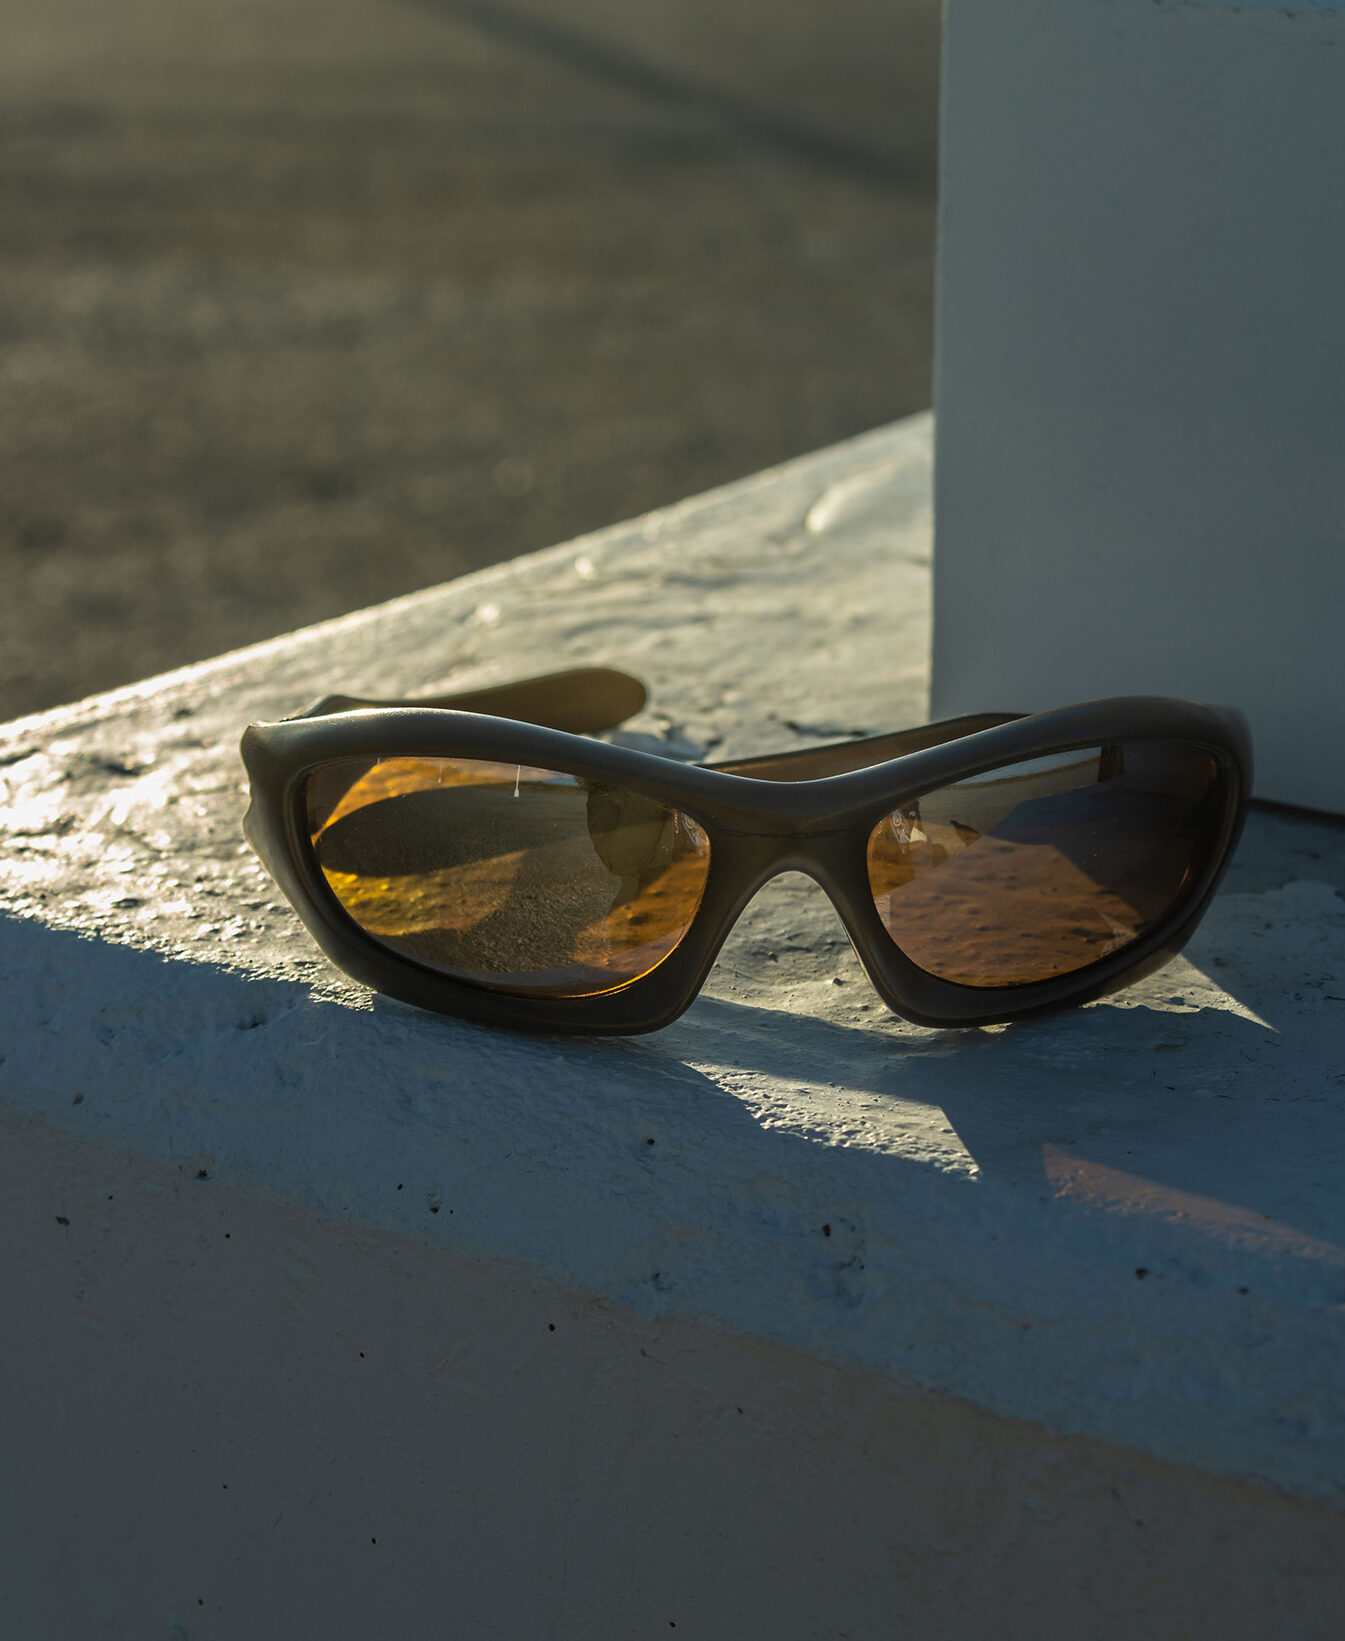 Sunglasses sit on a textured white ledge with sun shining through them.